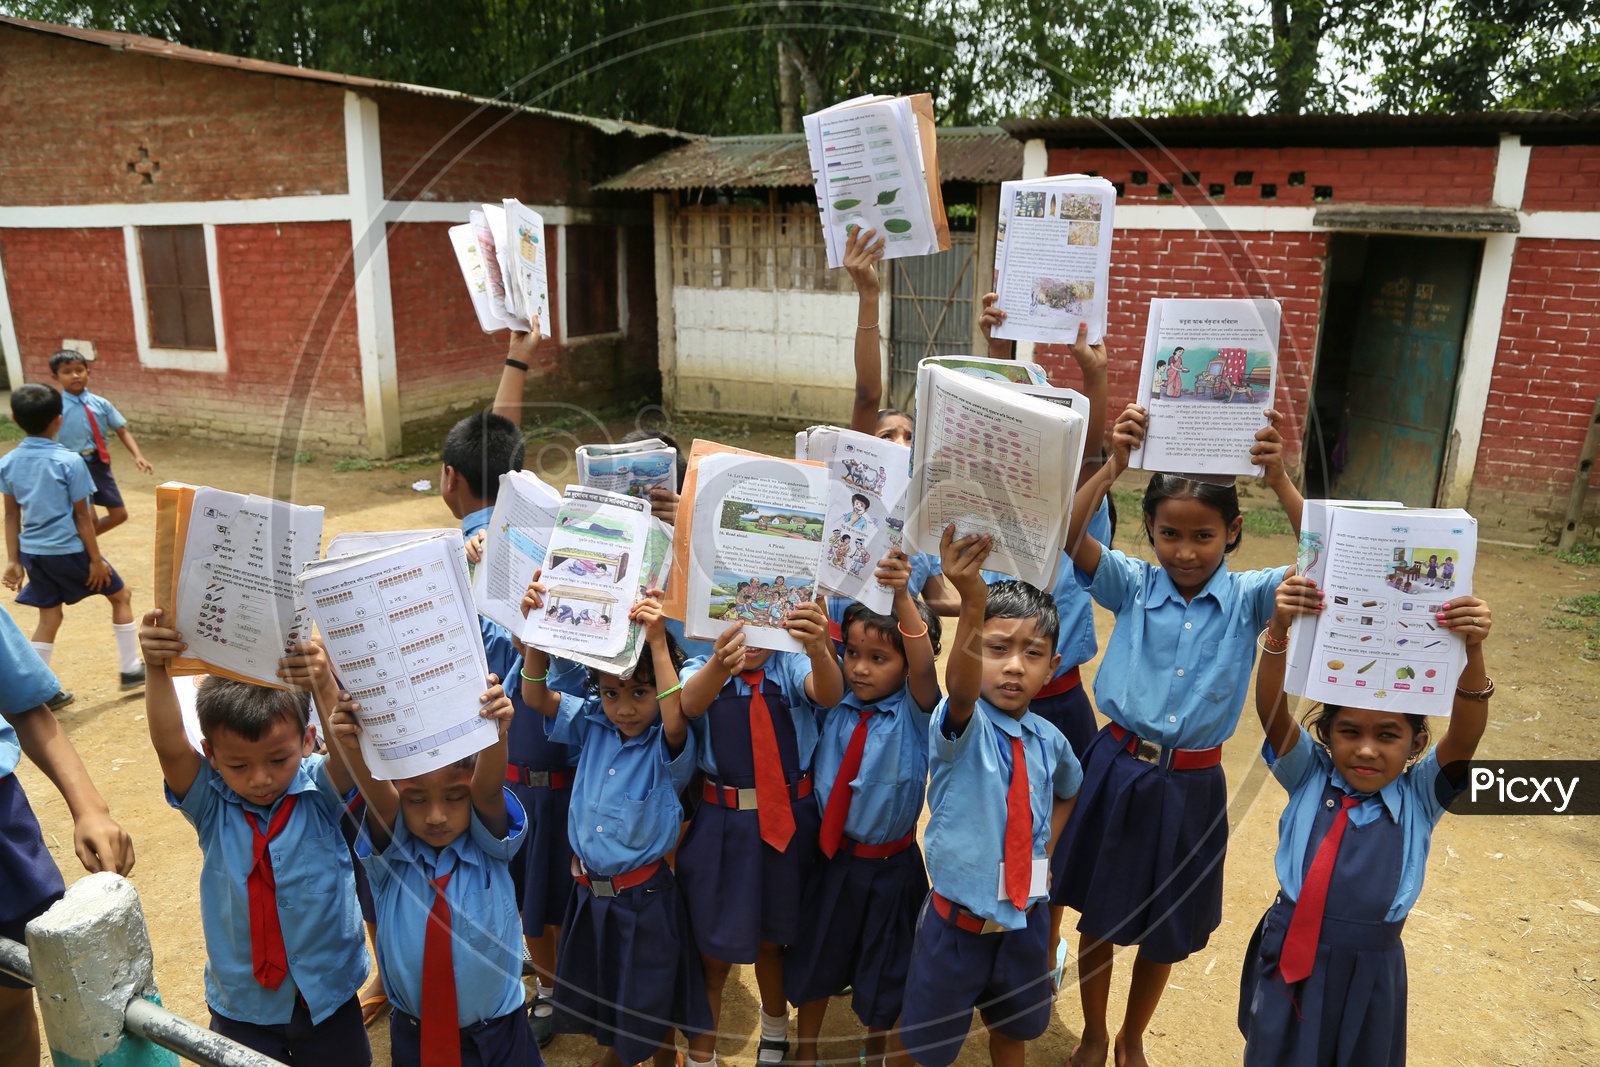 School children Or  School Students Wearing Uniforms And Holding Books In Hand   in a Rural Village School Compound Or Premise